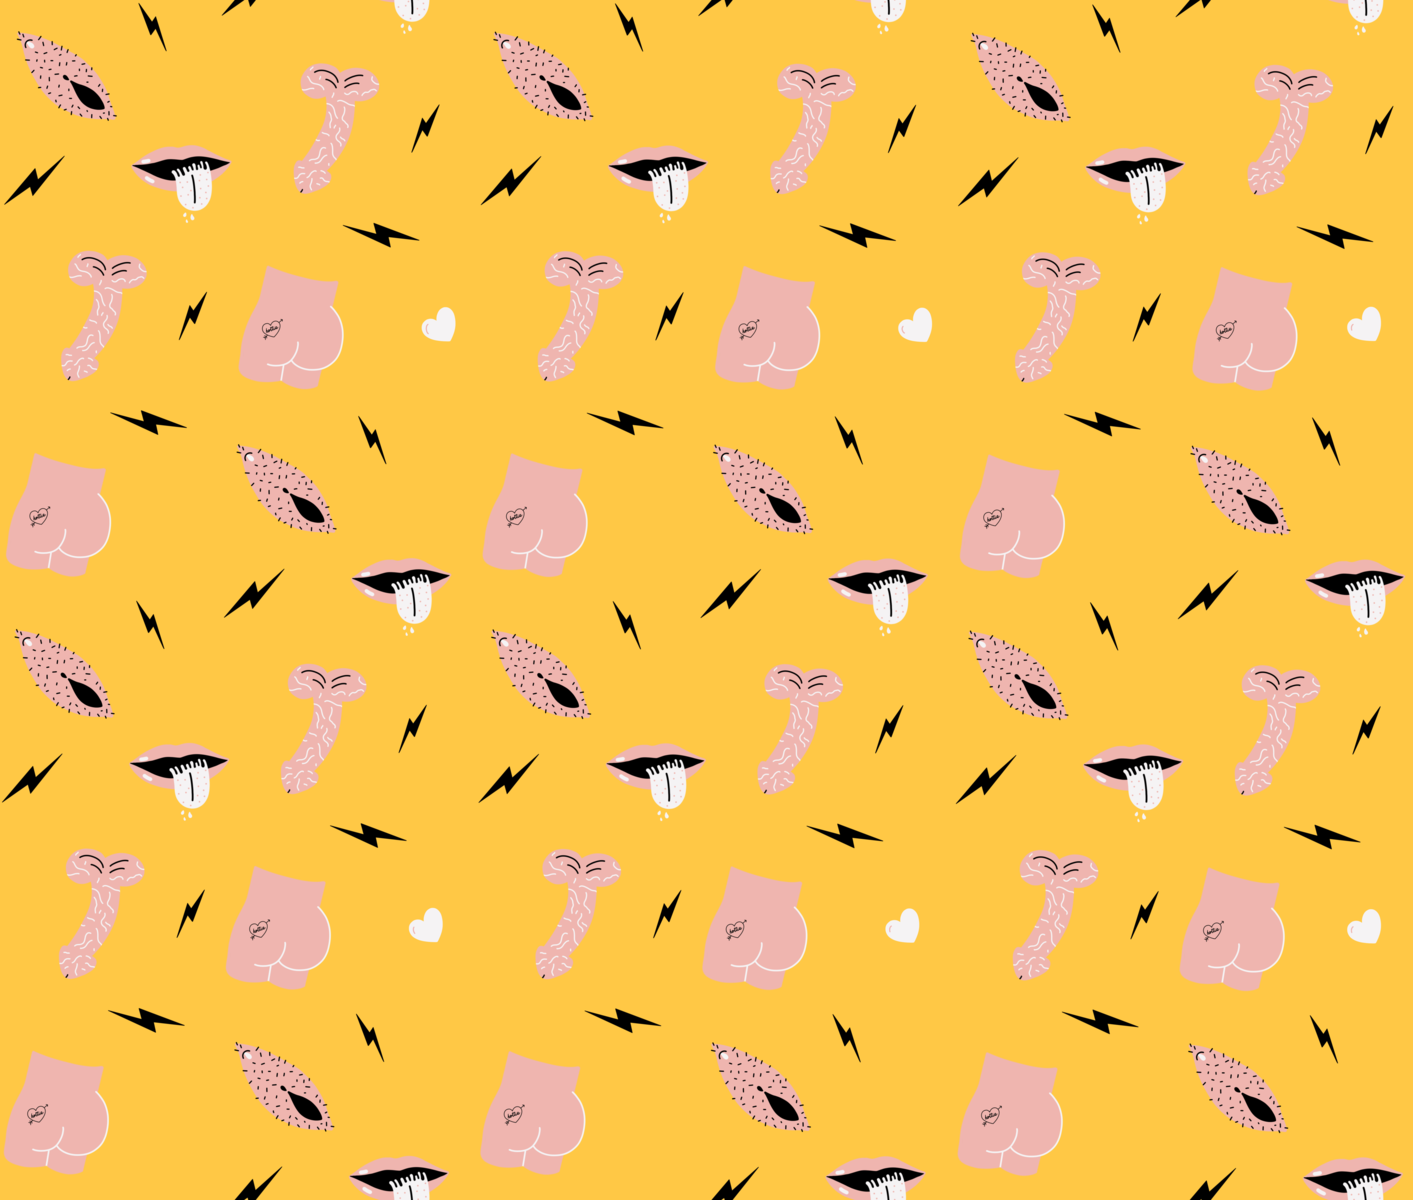 Pattern Work With Sexy Stuff By Kat Schober On Dribbble 9327